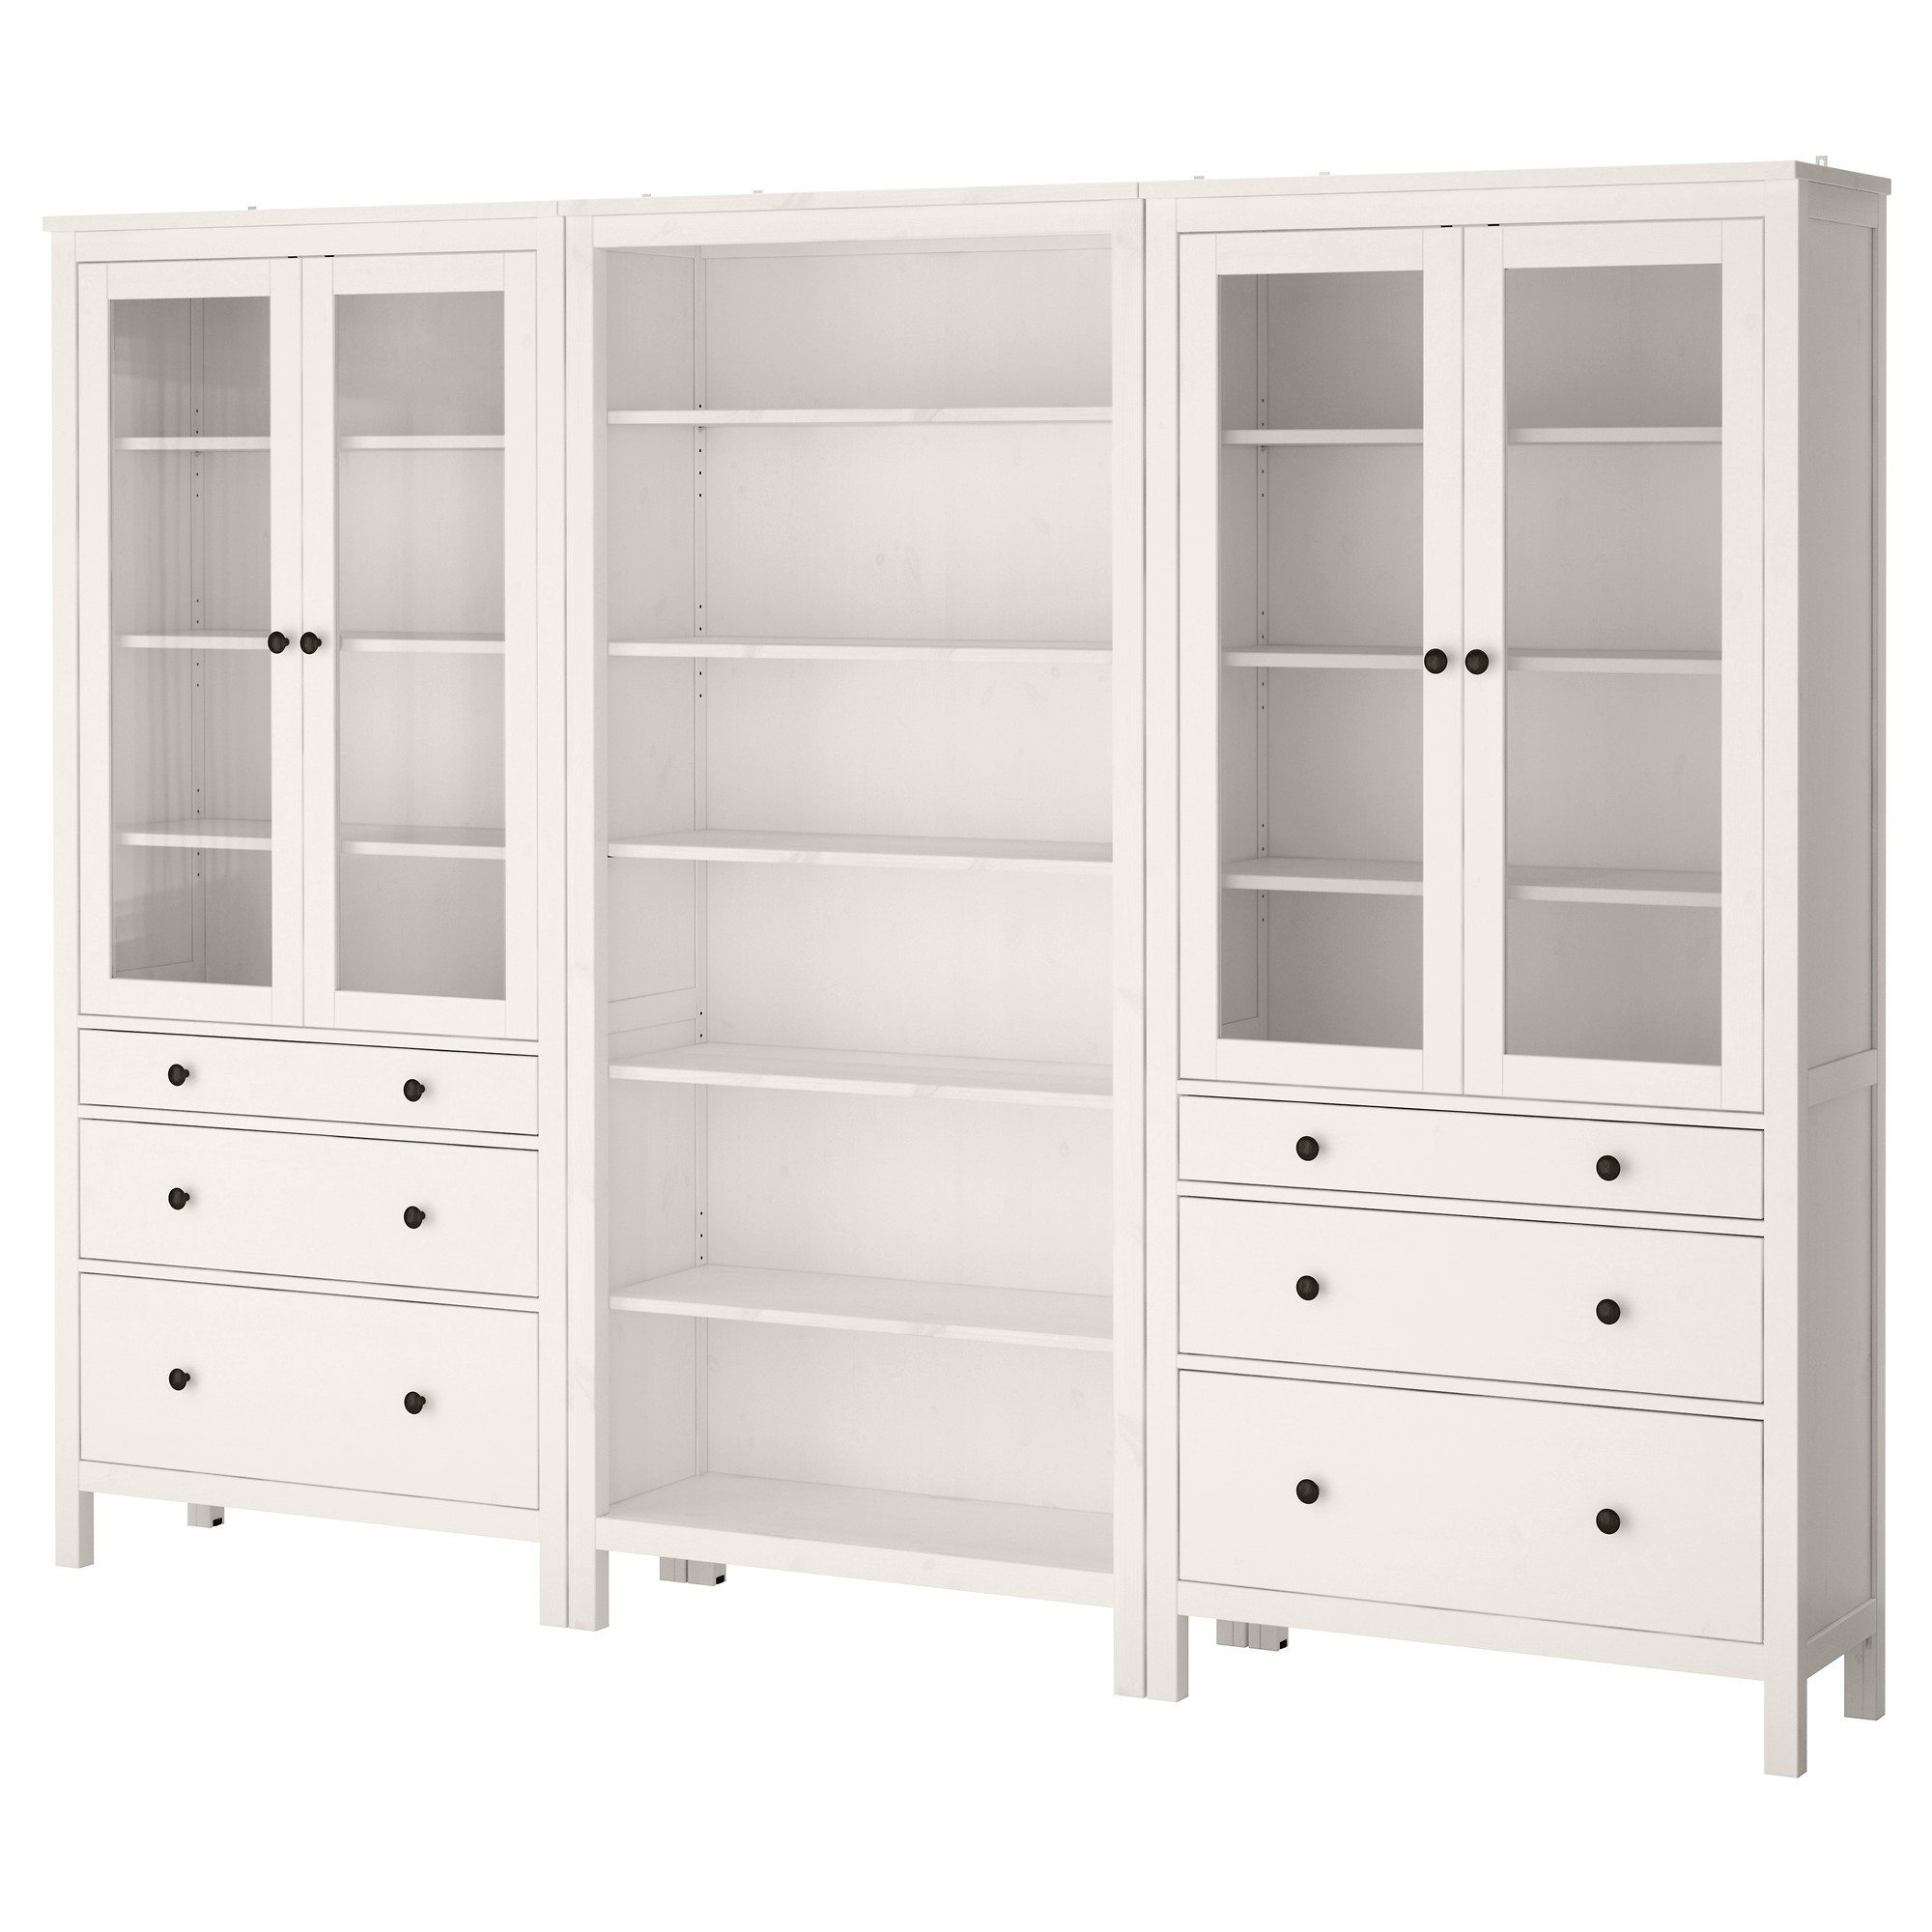 Tall Storage Cabinets With Sliding DoorsTall Storage Cabinets With Sliding Doors